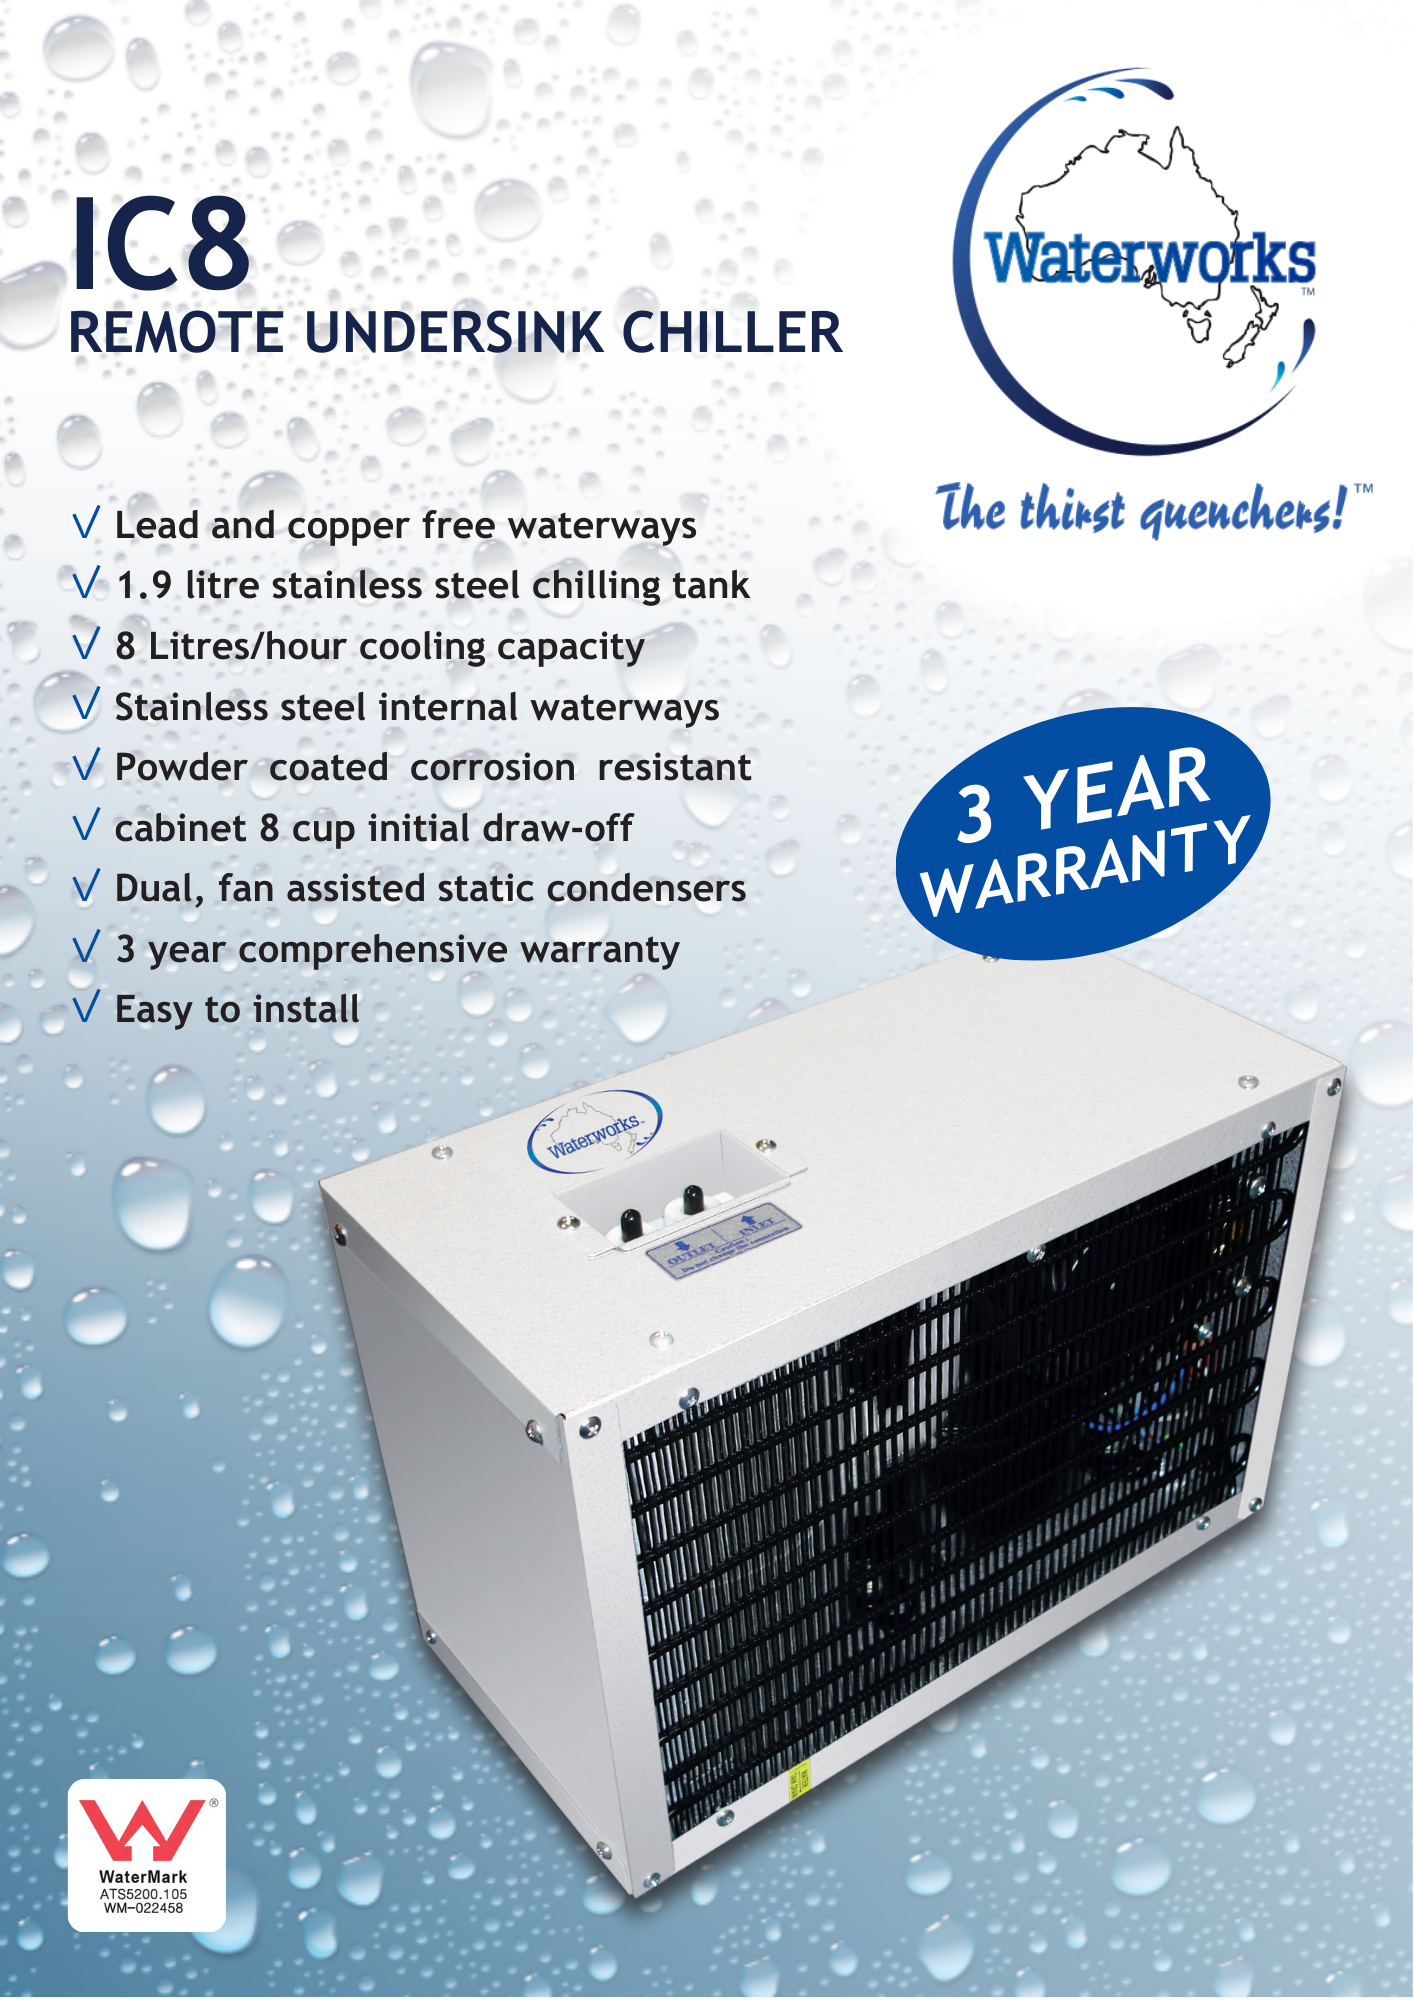 WATERWORKS™ - IC8 Under-sink or Remote Chiller - Awesome Water